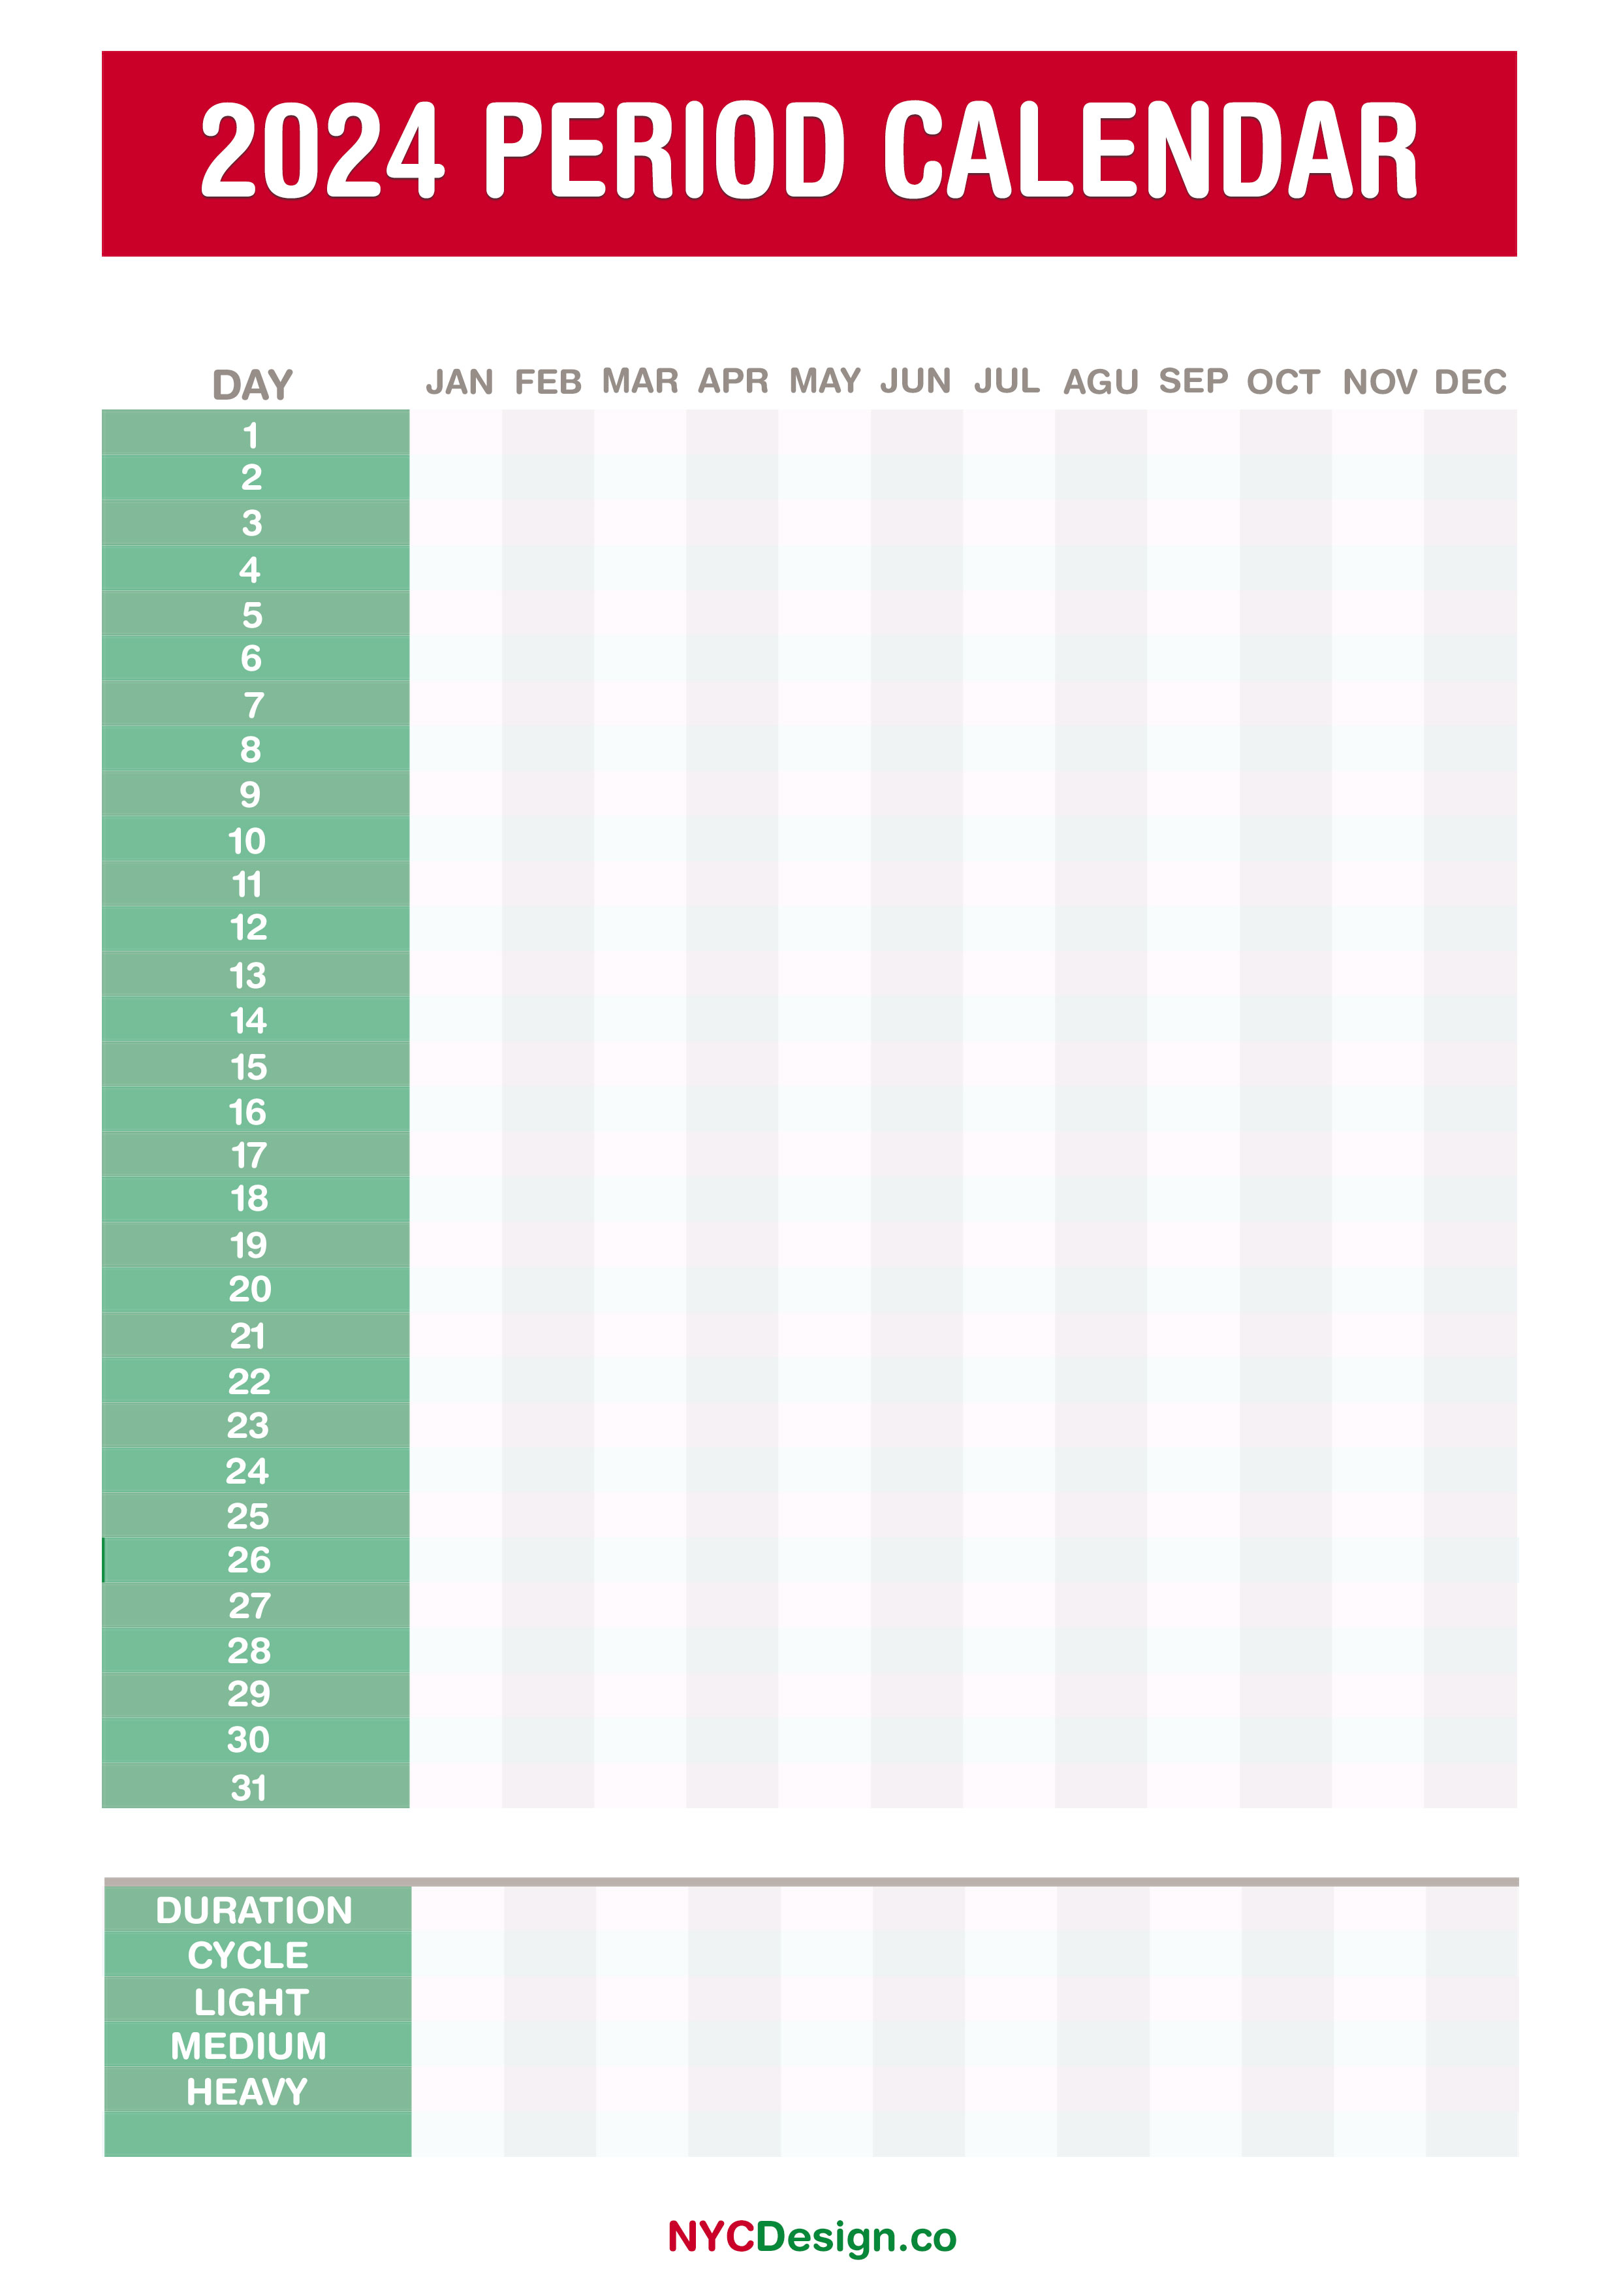 2024 Period Calendar, Printable, Free Red, Green nycdesign.us